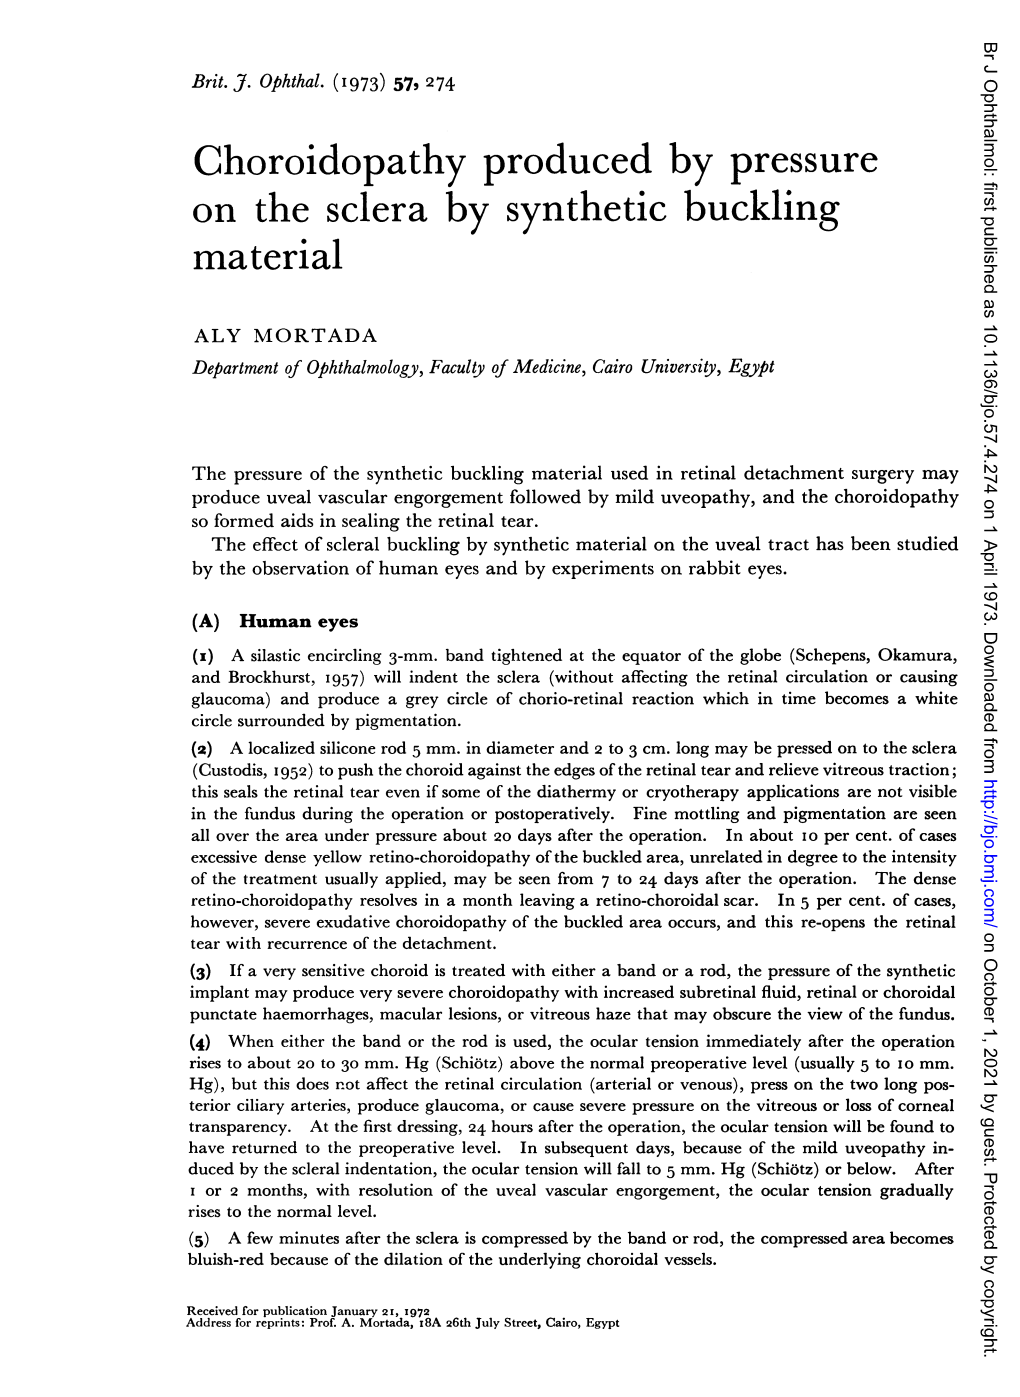 On the Sclera by Synthetic Buckling Material